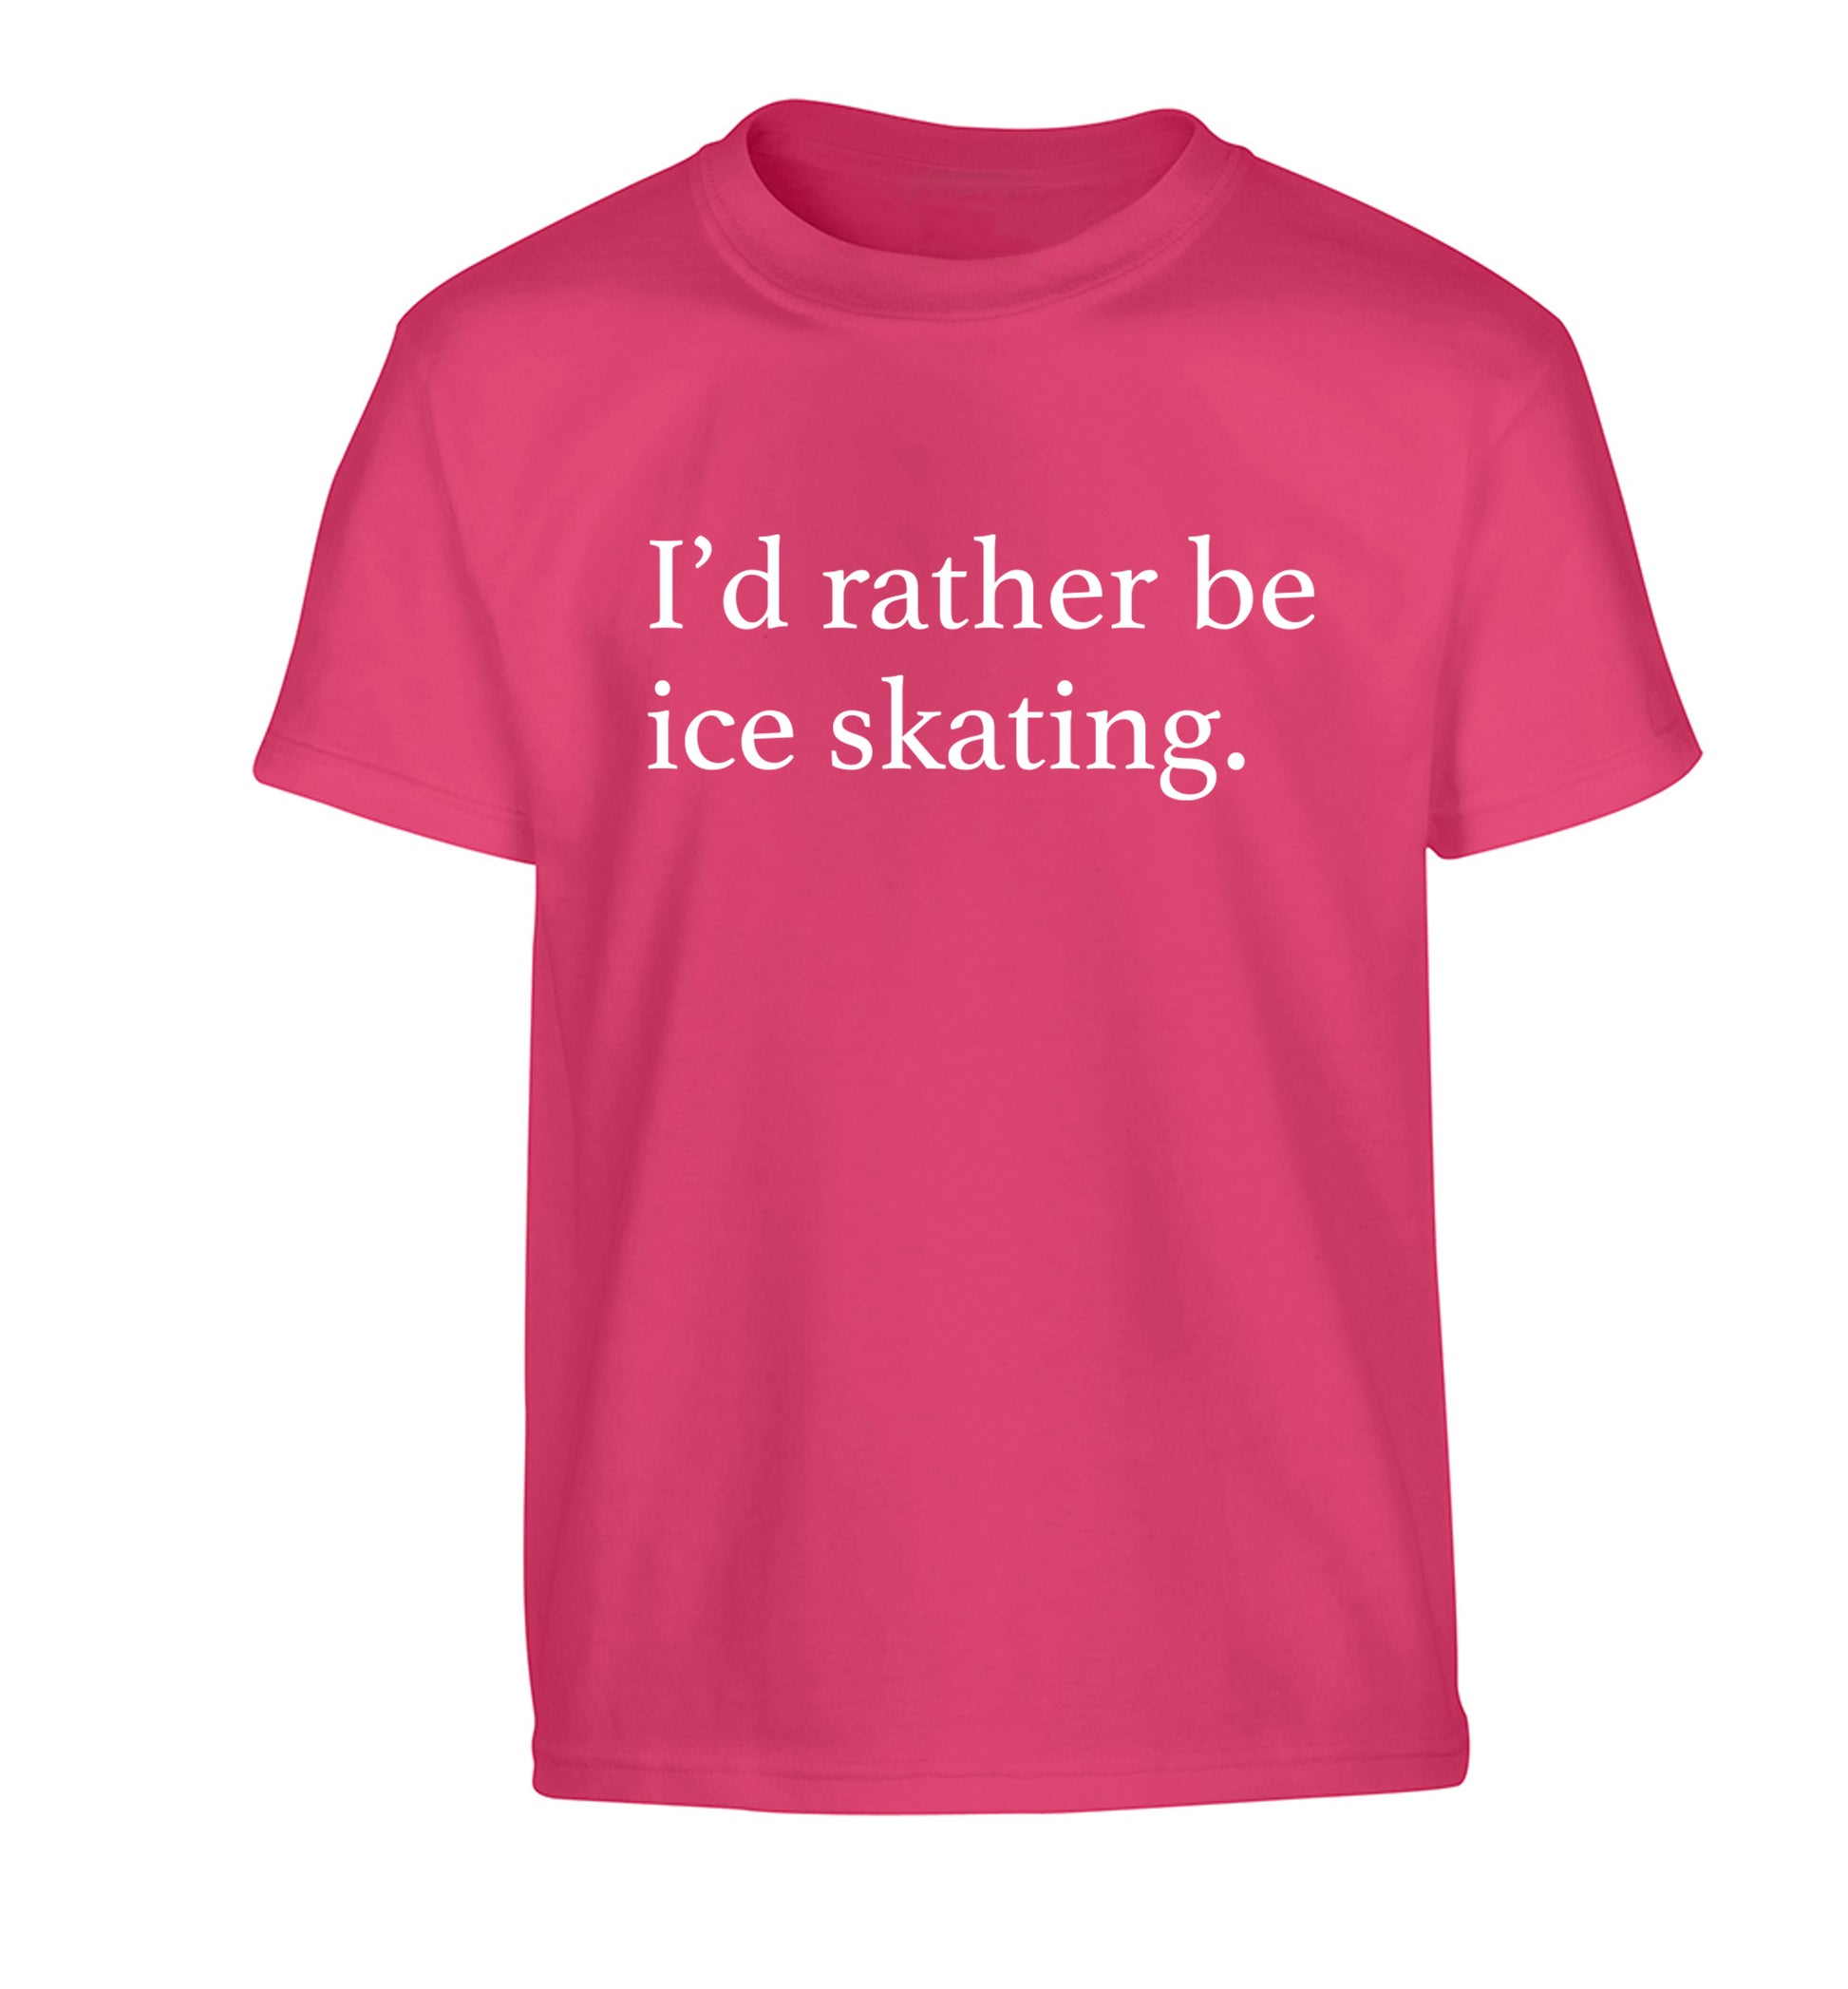 I'd rather be ice skating Children's pink Tshirt 12-14 Years